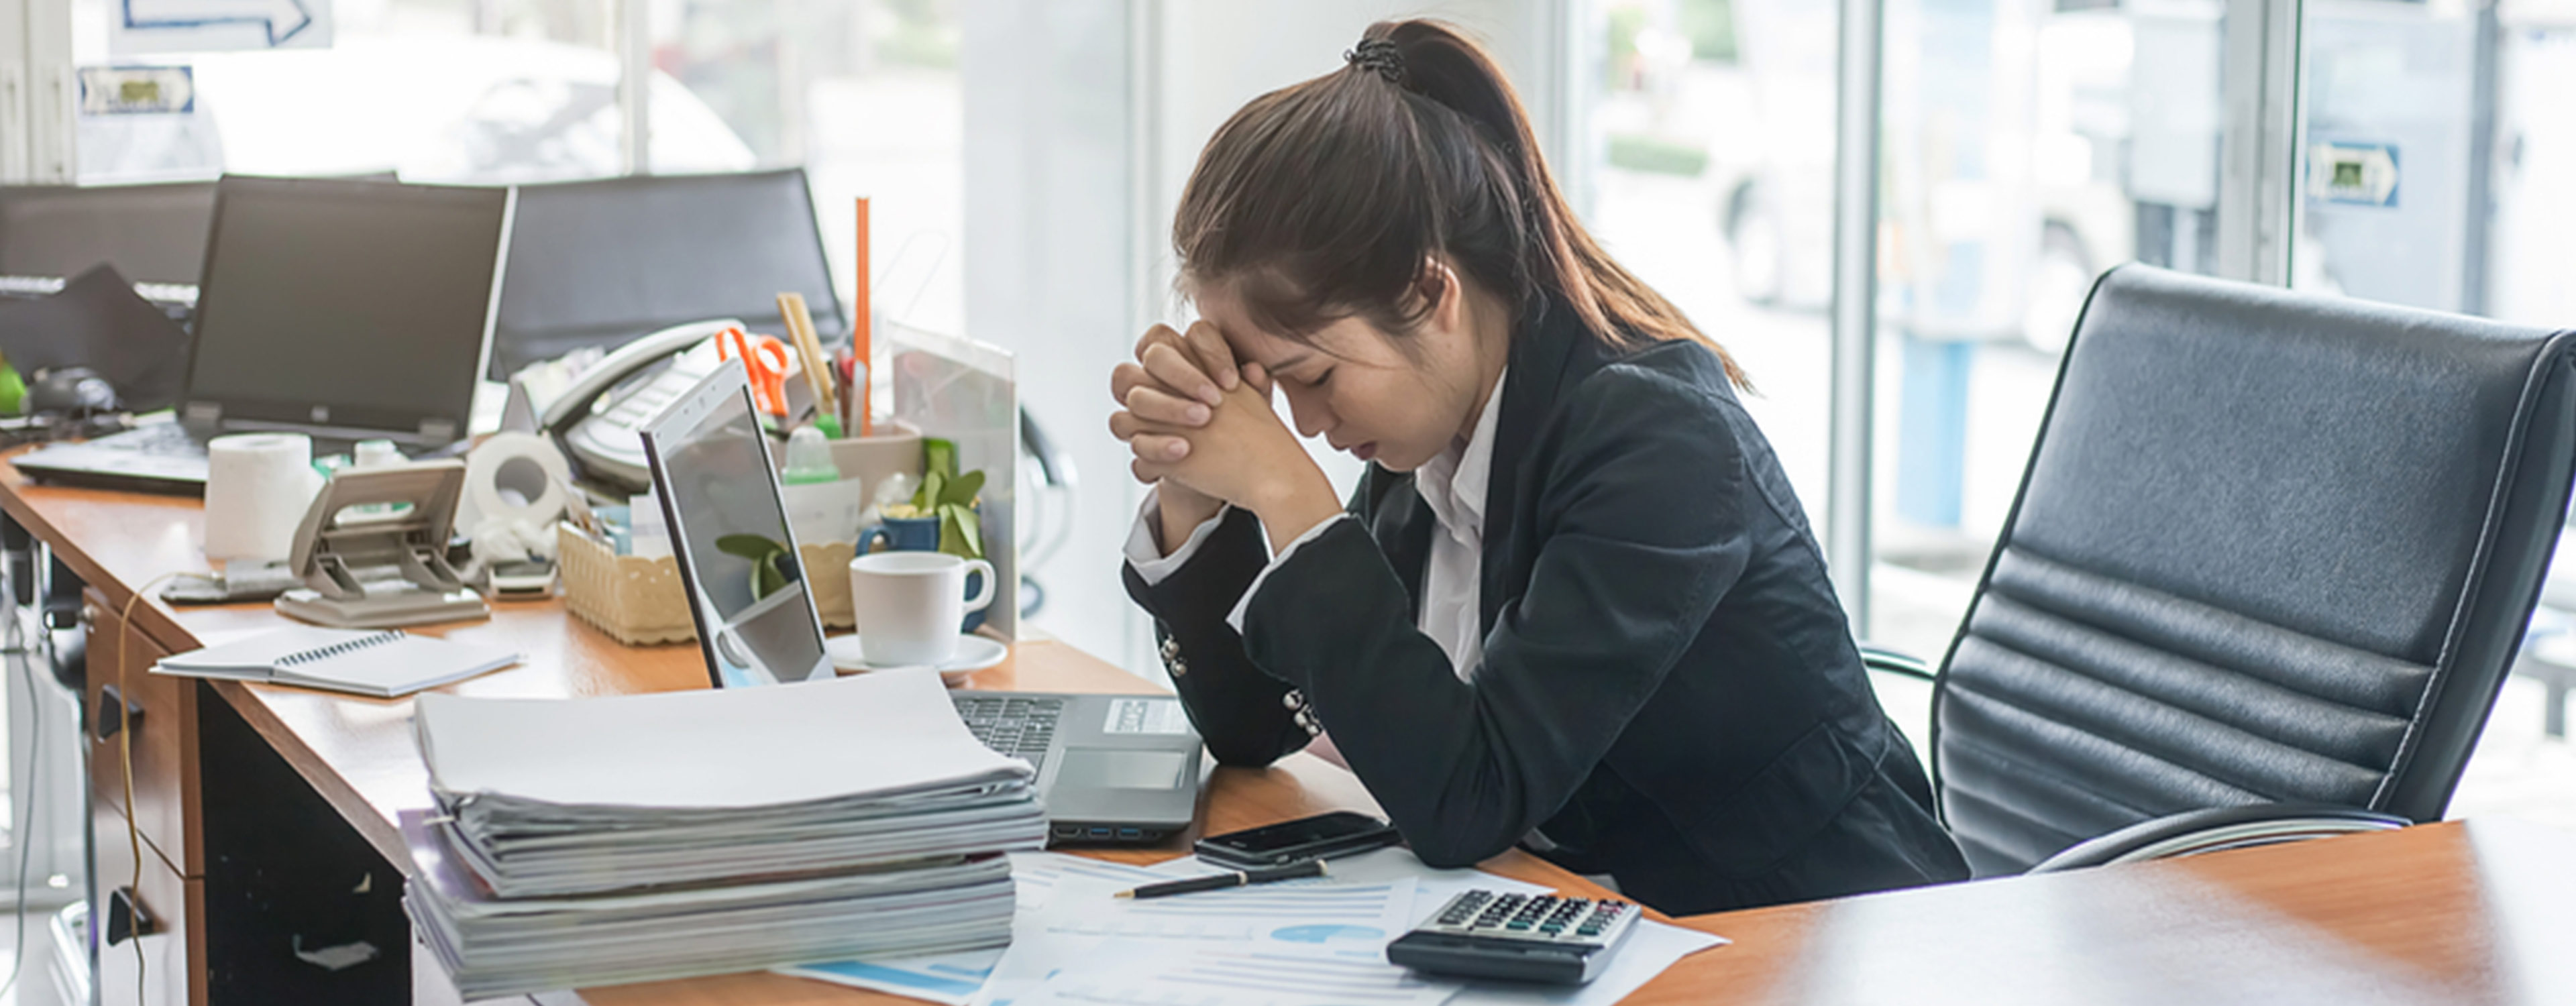 What is the cause of occupational burnout?